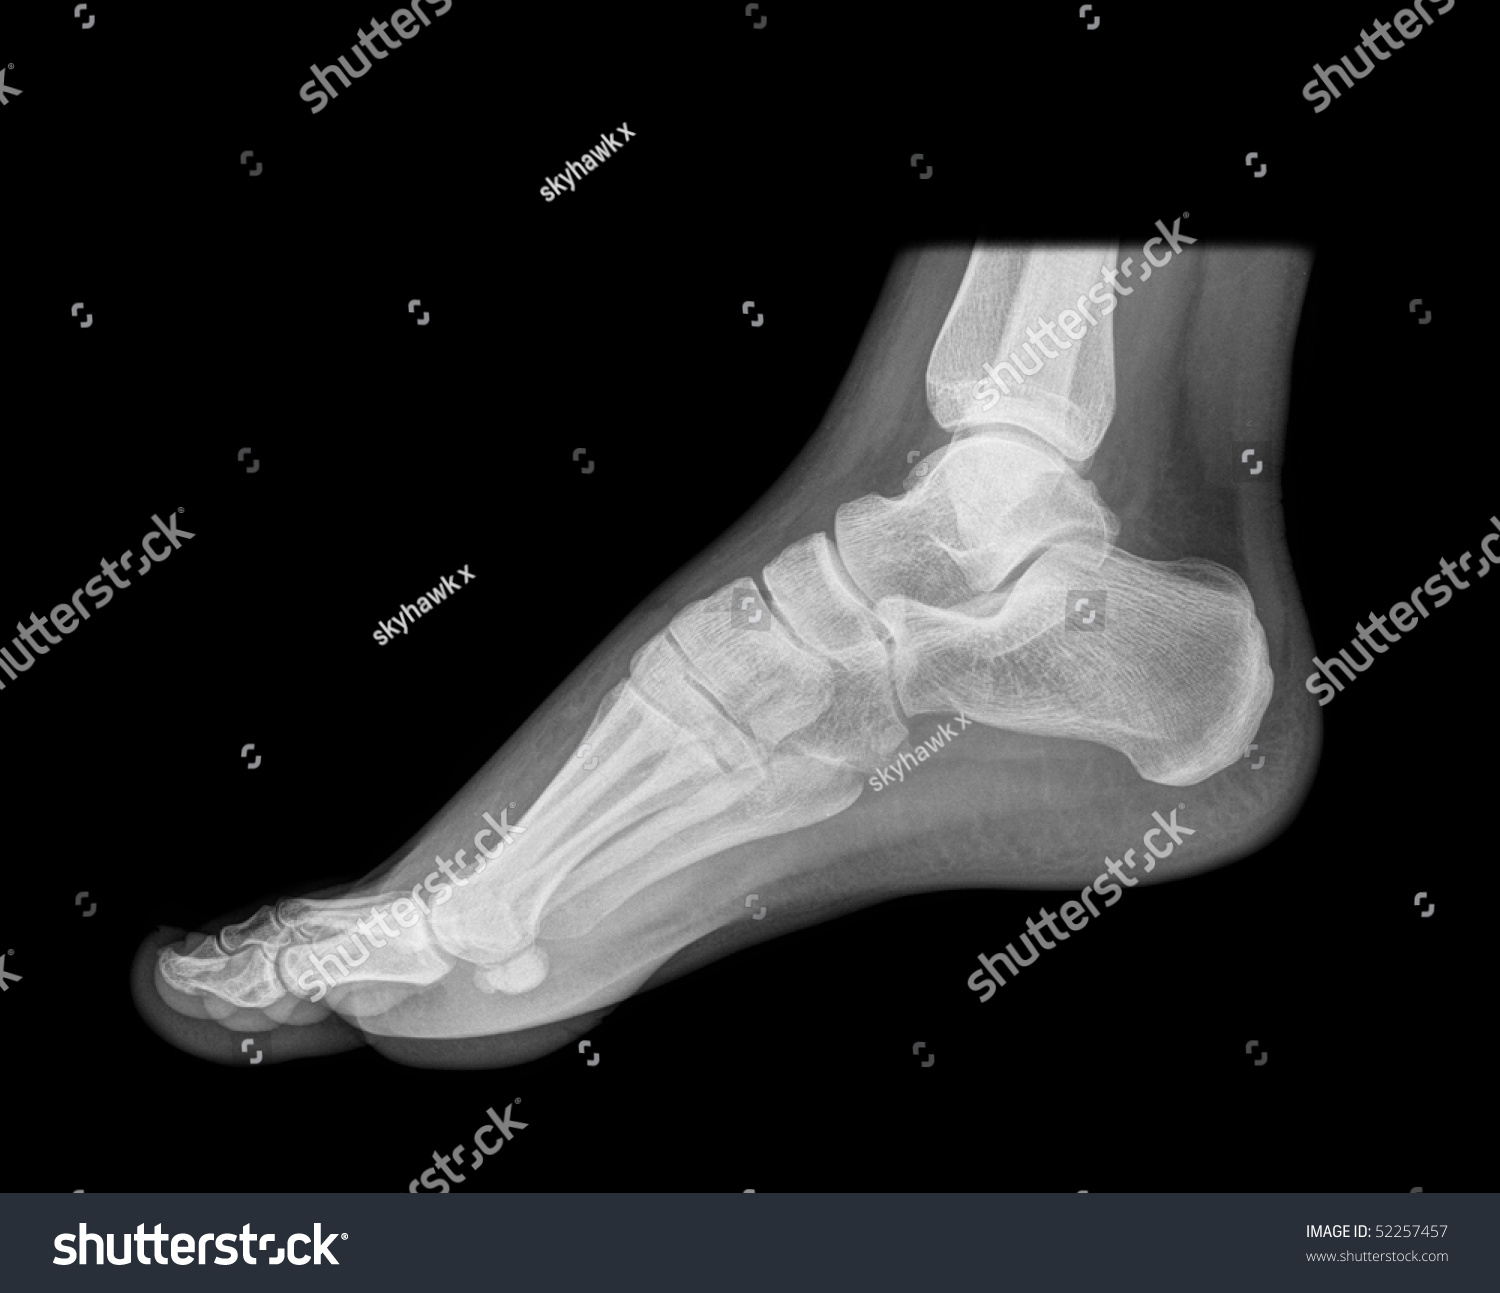 Standing Foot Xray Isolated On Black Stock Photo 52257457 - Shutterstock